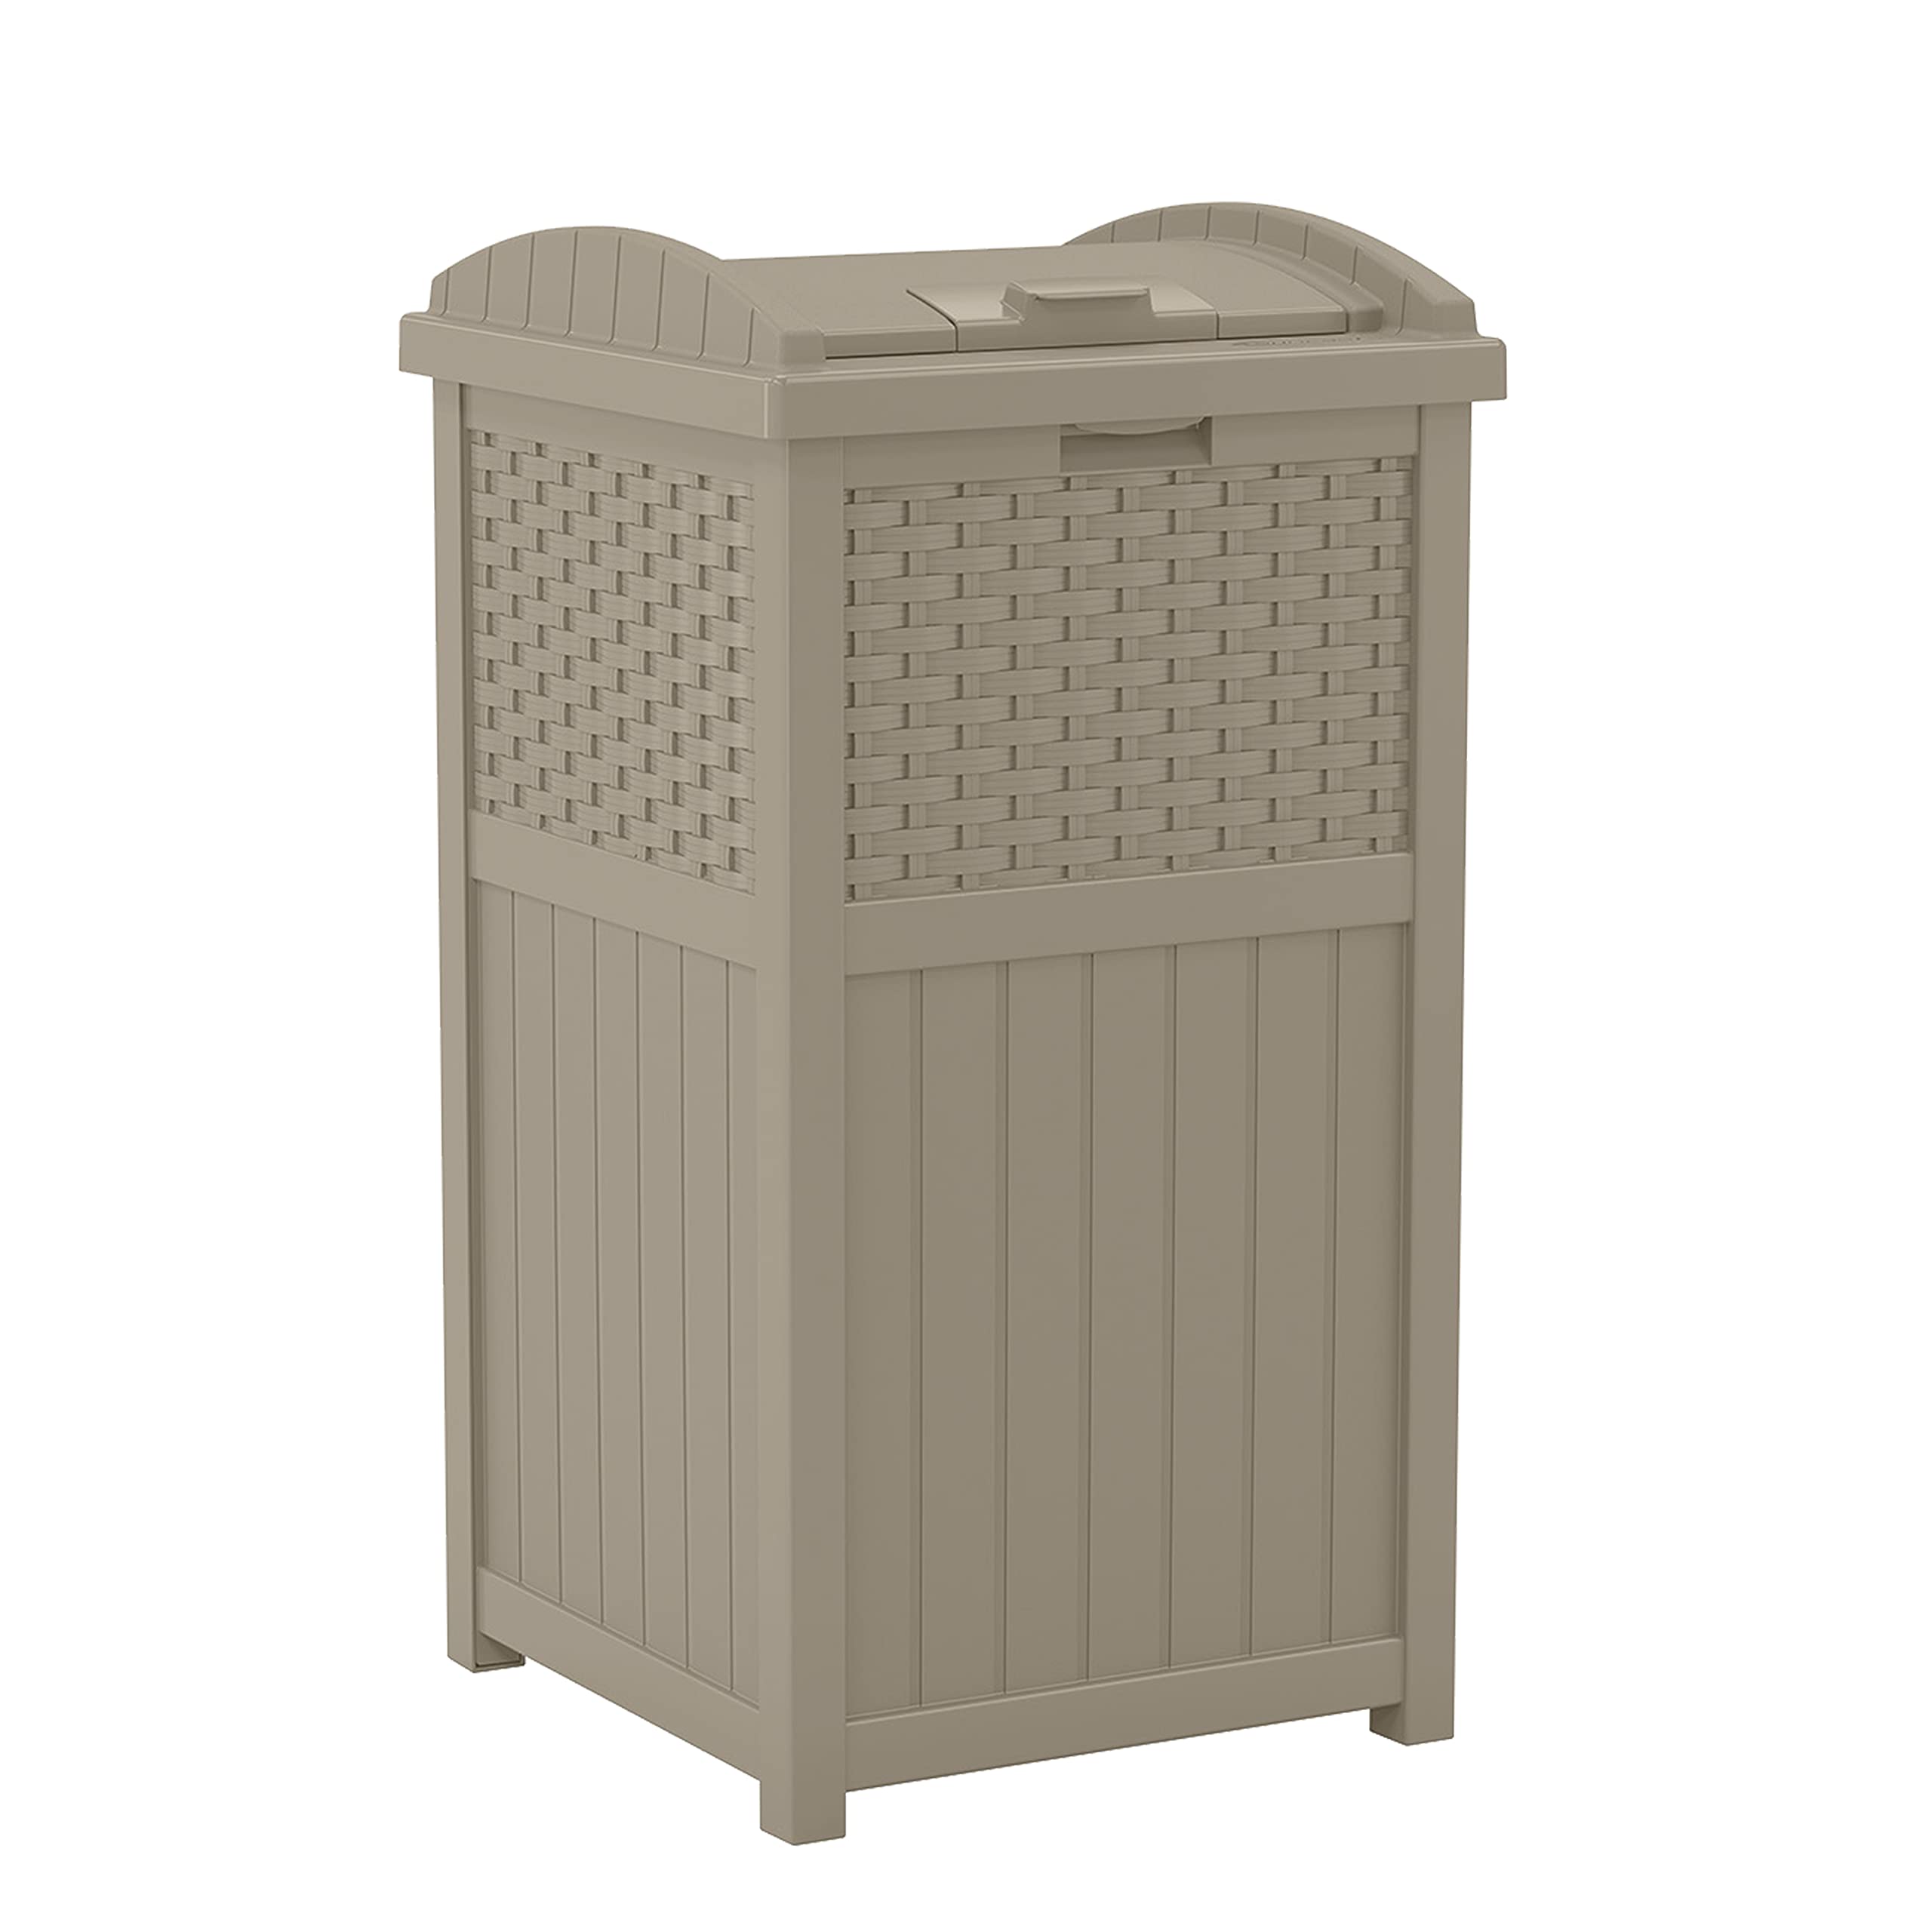 Suncast Corporation Suncast 33 Gallon Hideaway Trash Can for Patio - Resin Outdoor Trash with Lid - Use in Backyard, Deck, or Patio - Dark Taupe